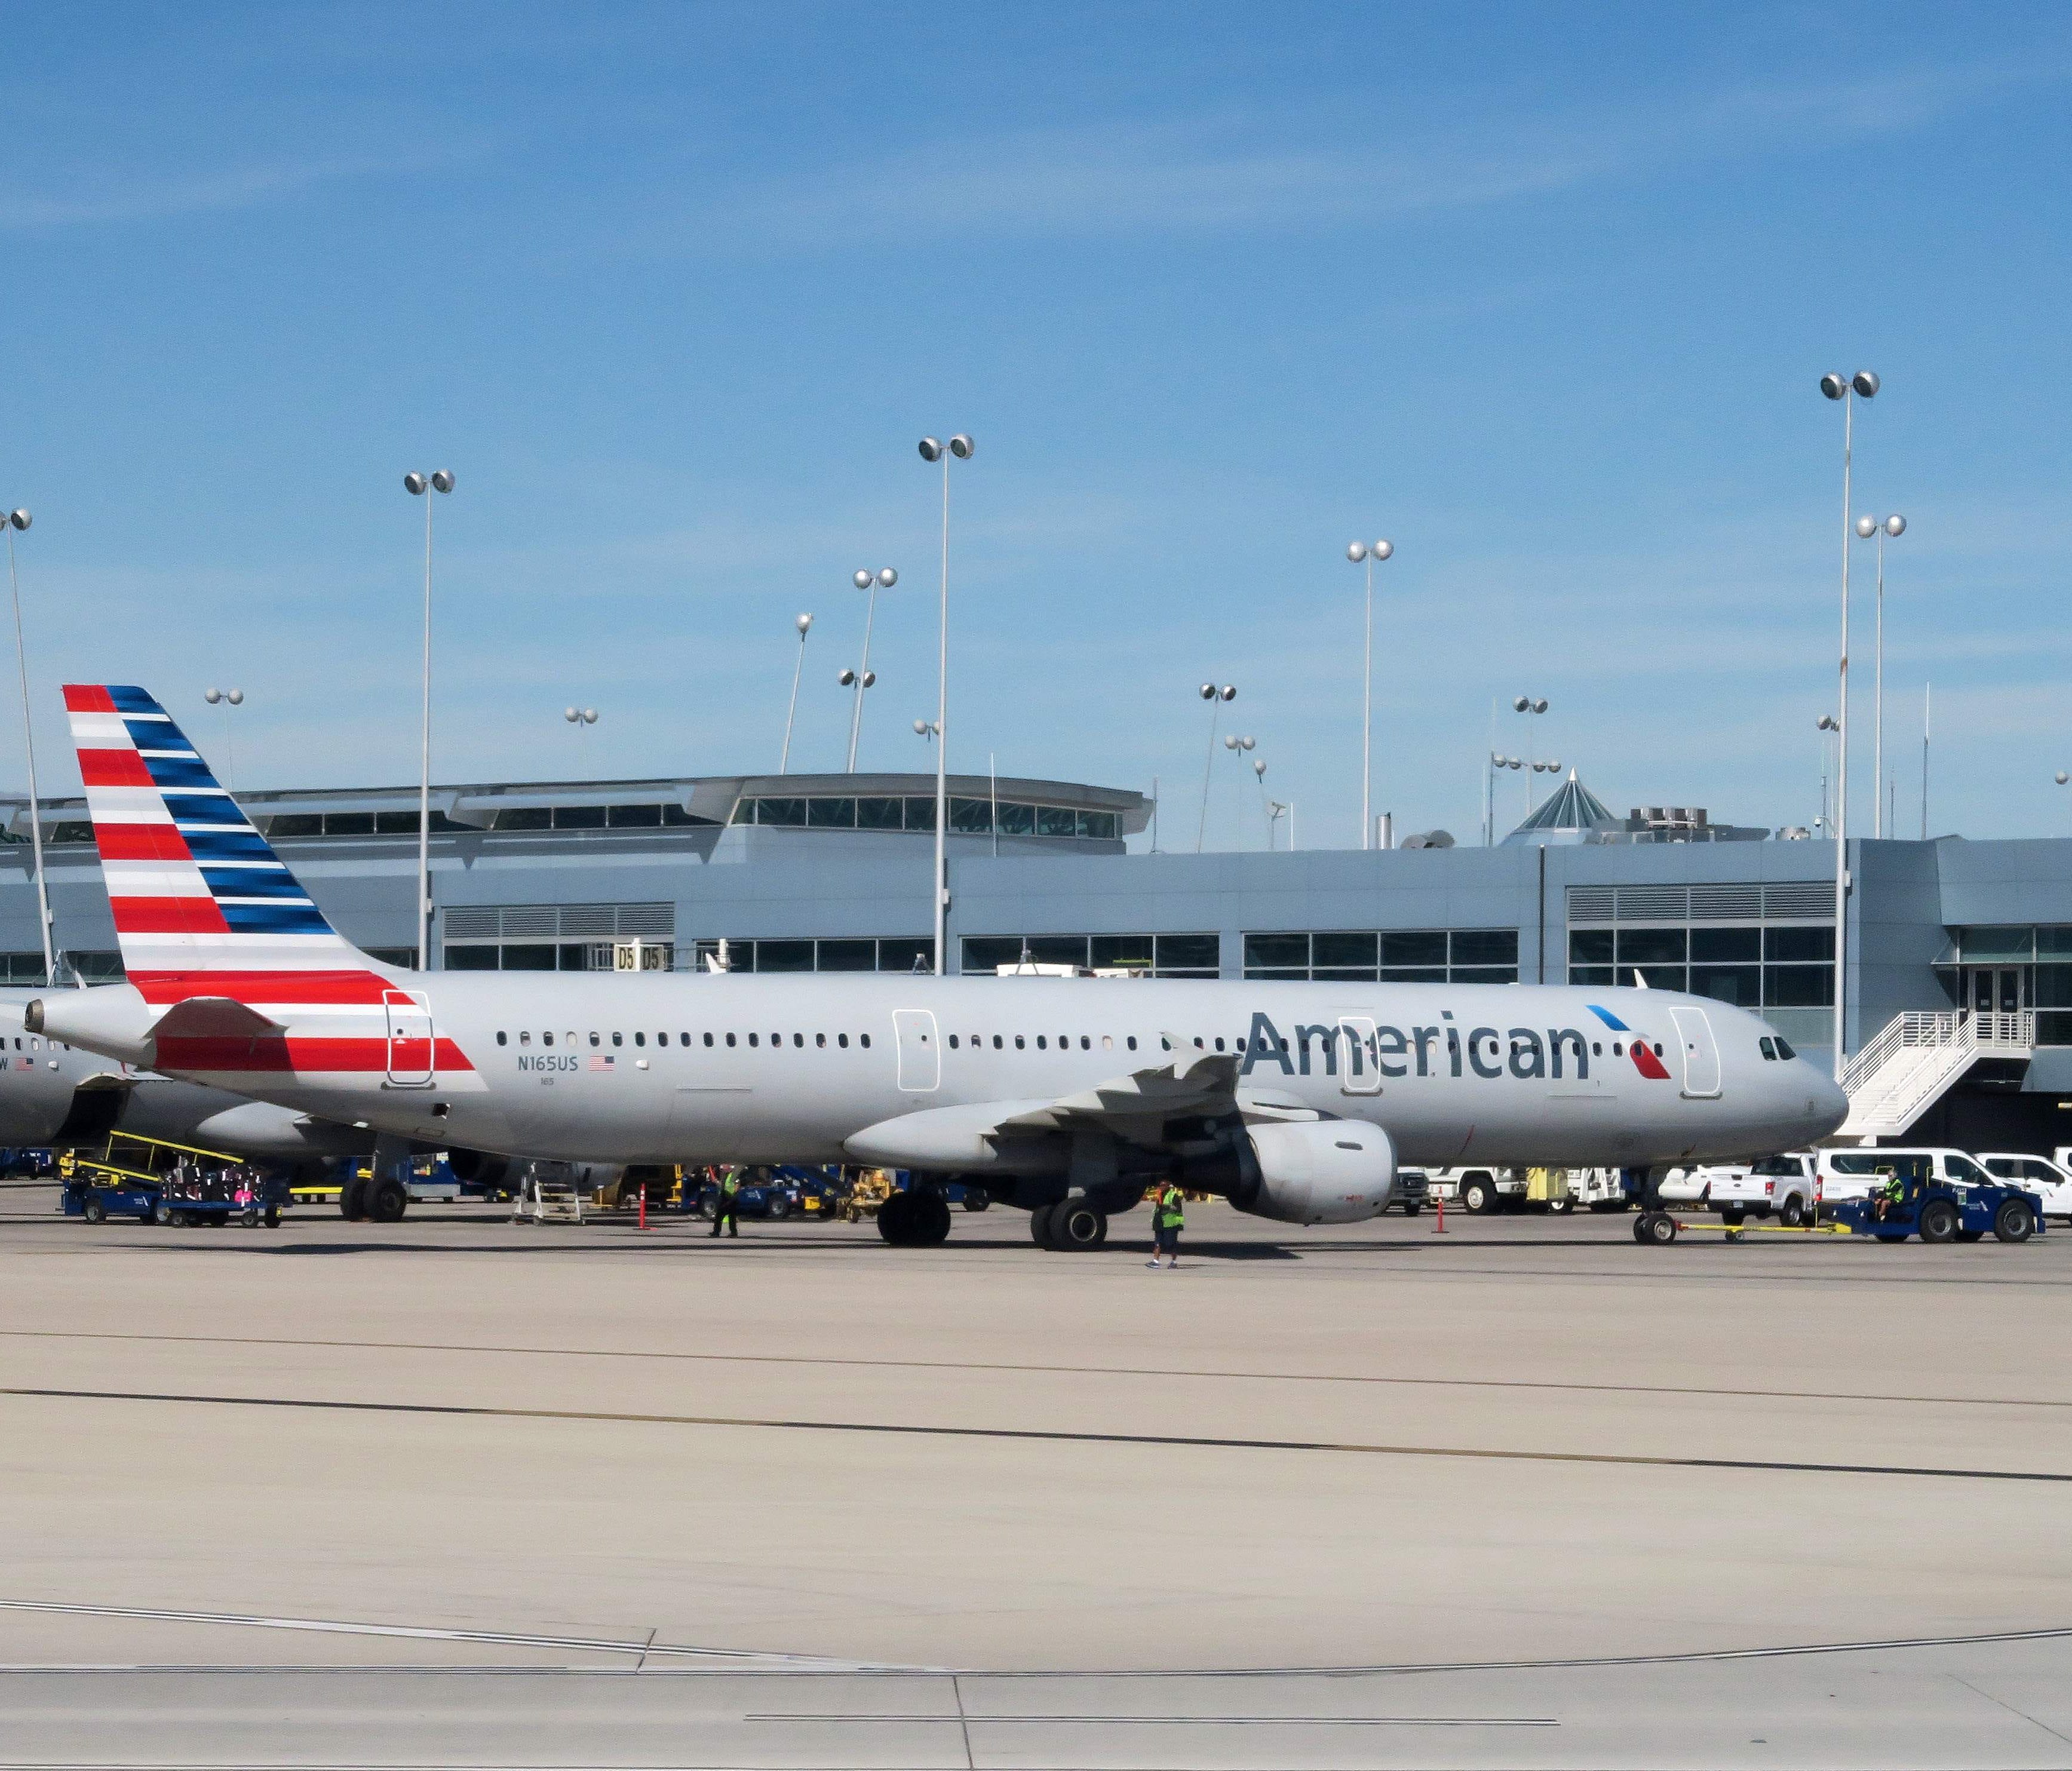 This file photo taken on February 15, 2017 shows American Airlines planes sitting at the gate on the tarmac of McCarran International Airport in Las Vegas, Nevada.